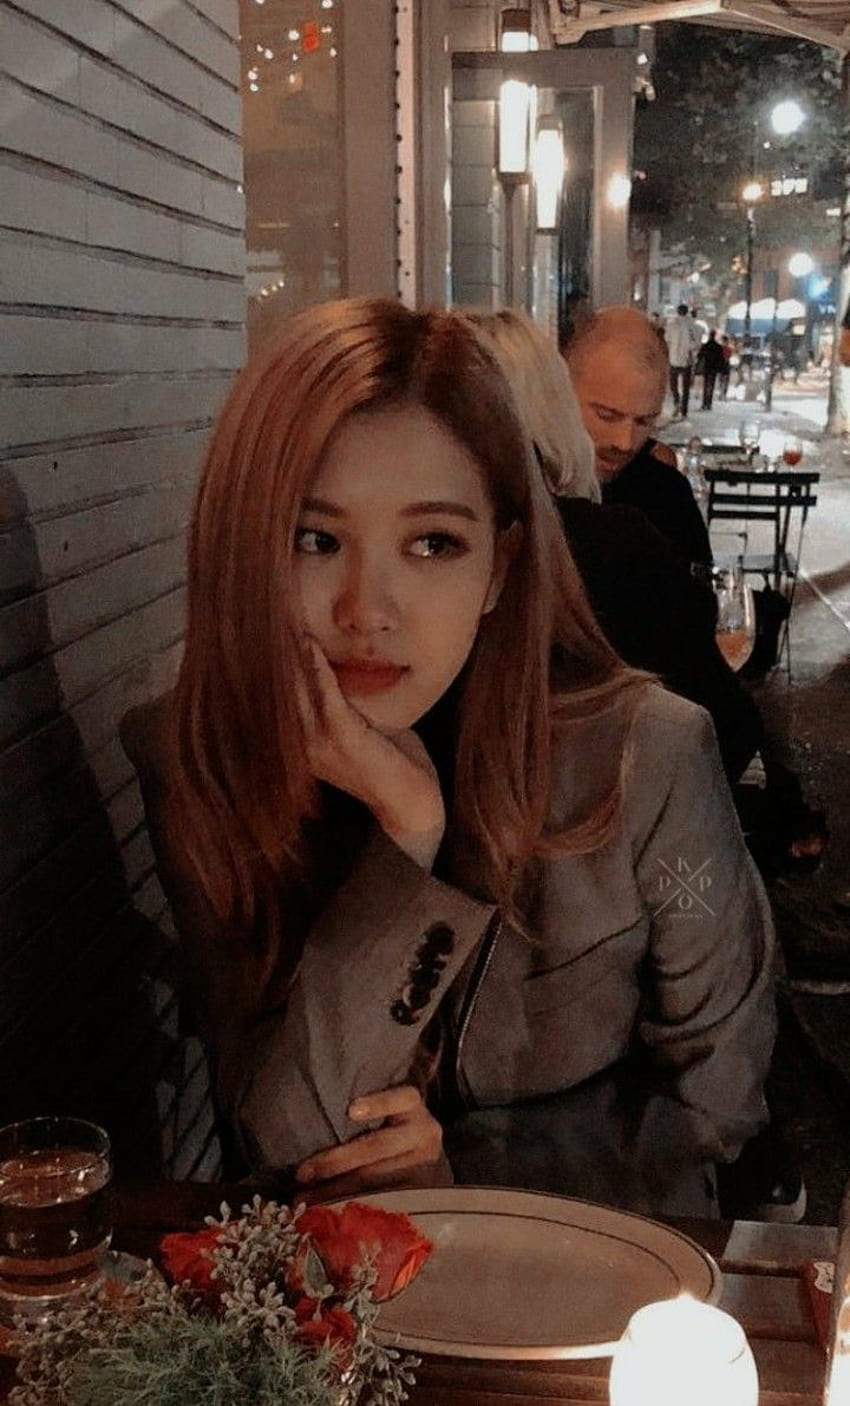 Rosé at date night, park chae young HD phone wallpaper